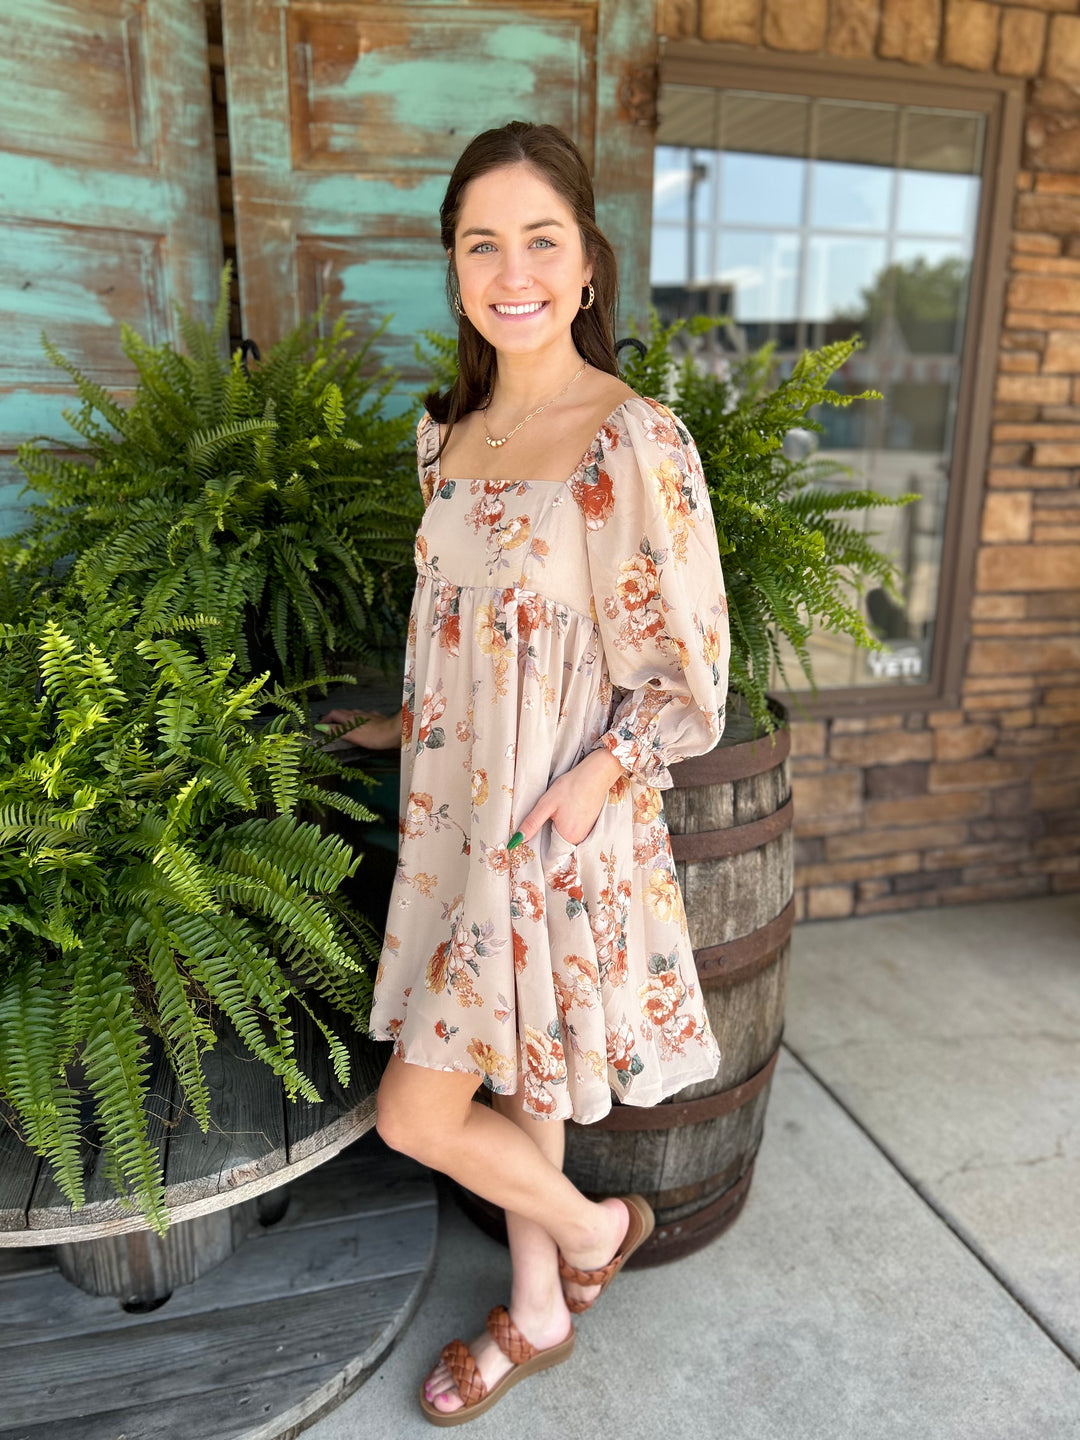 Babydoll Style Floral Print Dress-Dresses-Sweet Lemon-Evergreen Boutique, Women’s Fashion Boutique in Santa Claus, Indiana